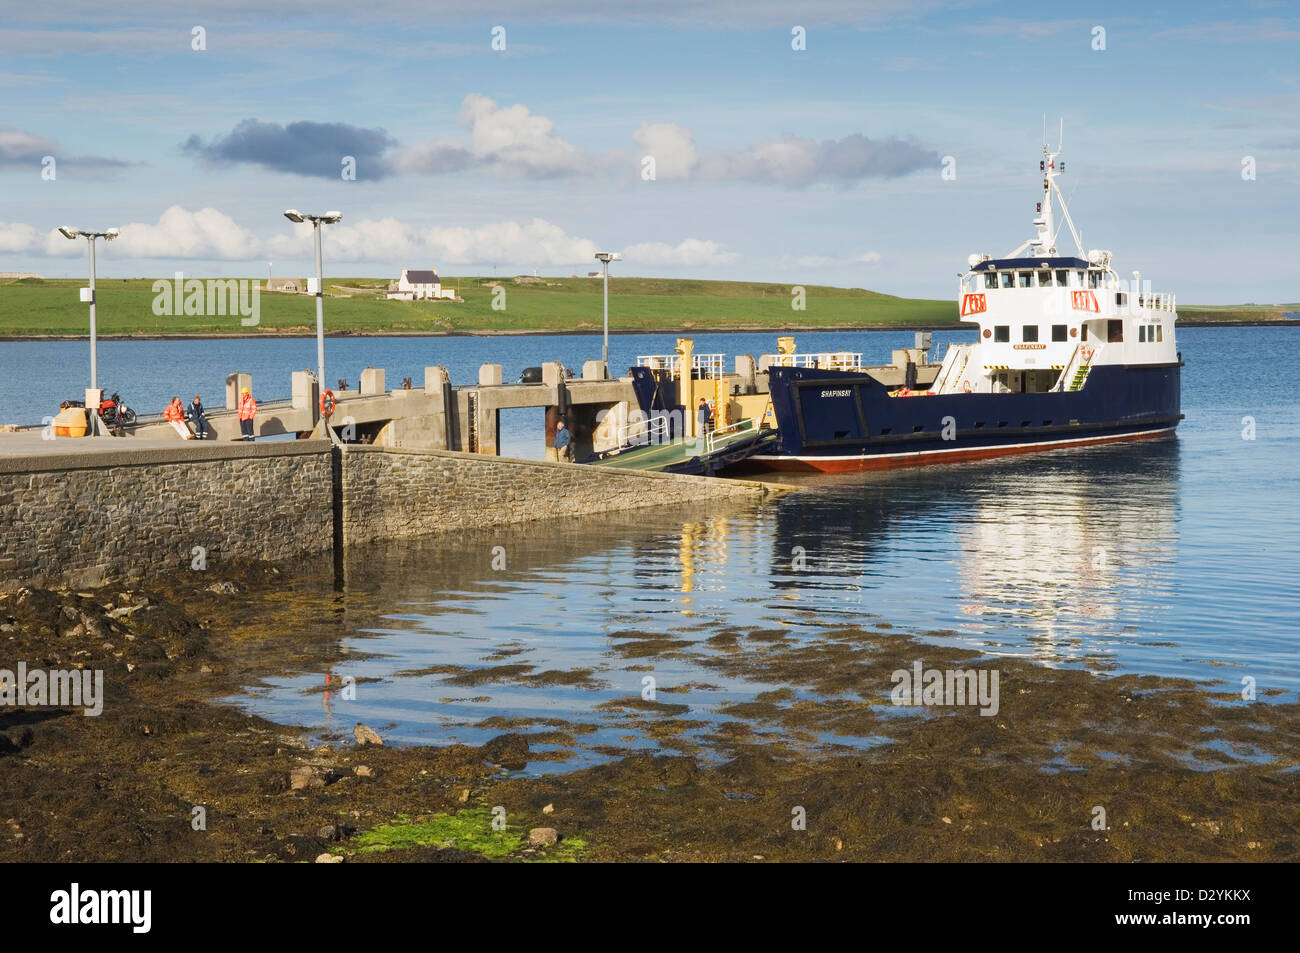 The ferry at the jetty on the island of Shapinsay, Orkney Islands, Scotland. Stock Photo